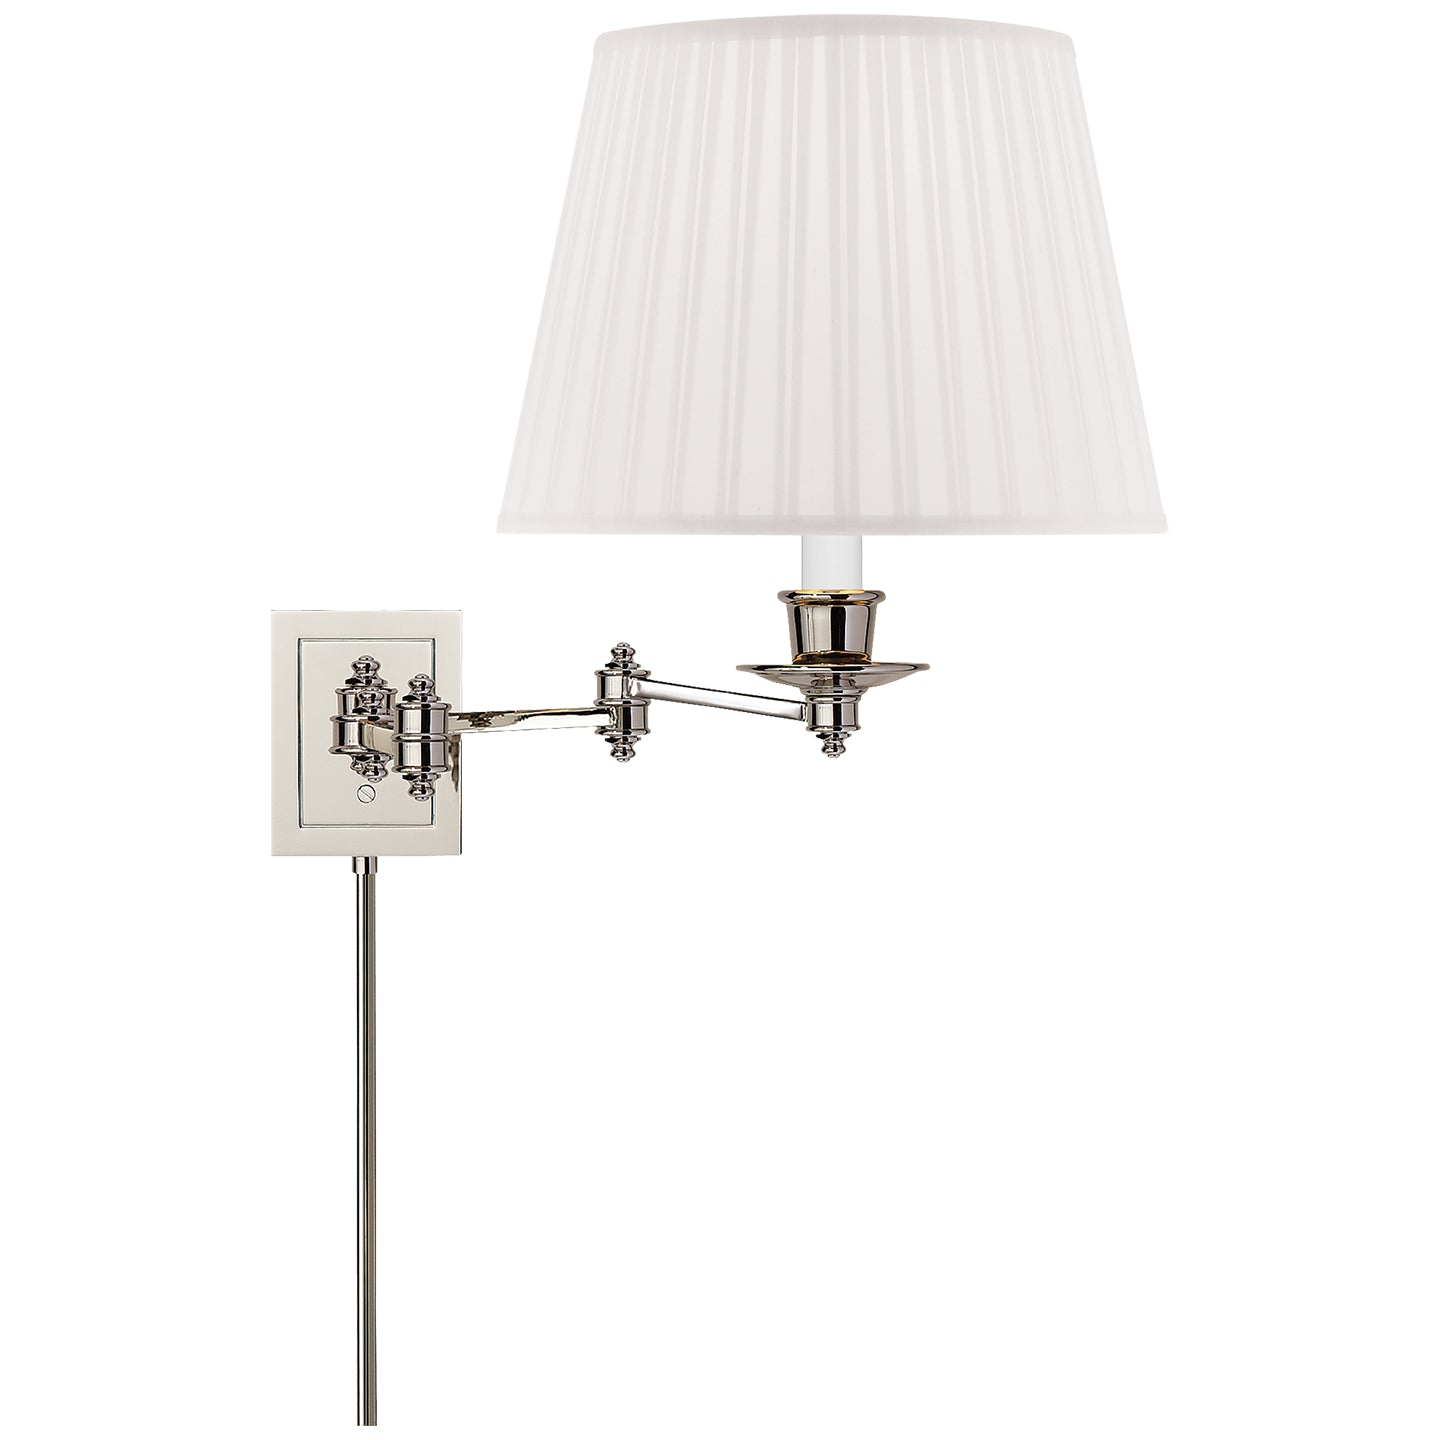 Load image into Gallery viewer, Visual Comfort Signature - S 2000PN-S - One Light Swing Arm Wall Lamp - Swing Arm Sconce - Polished Nickel
